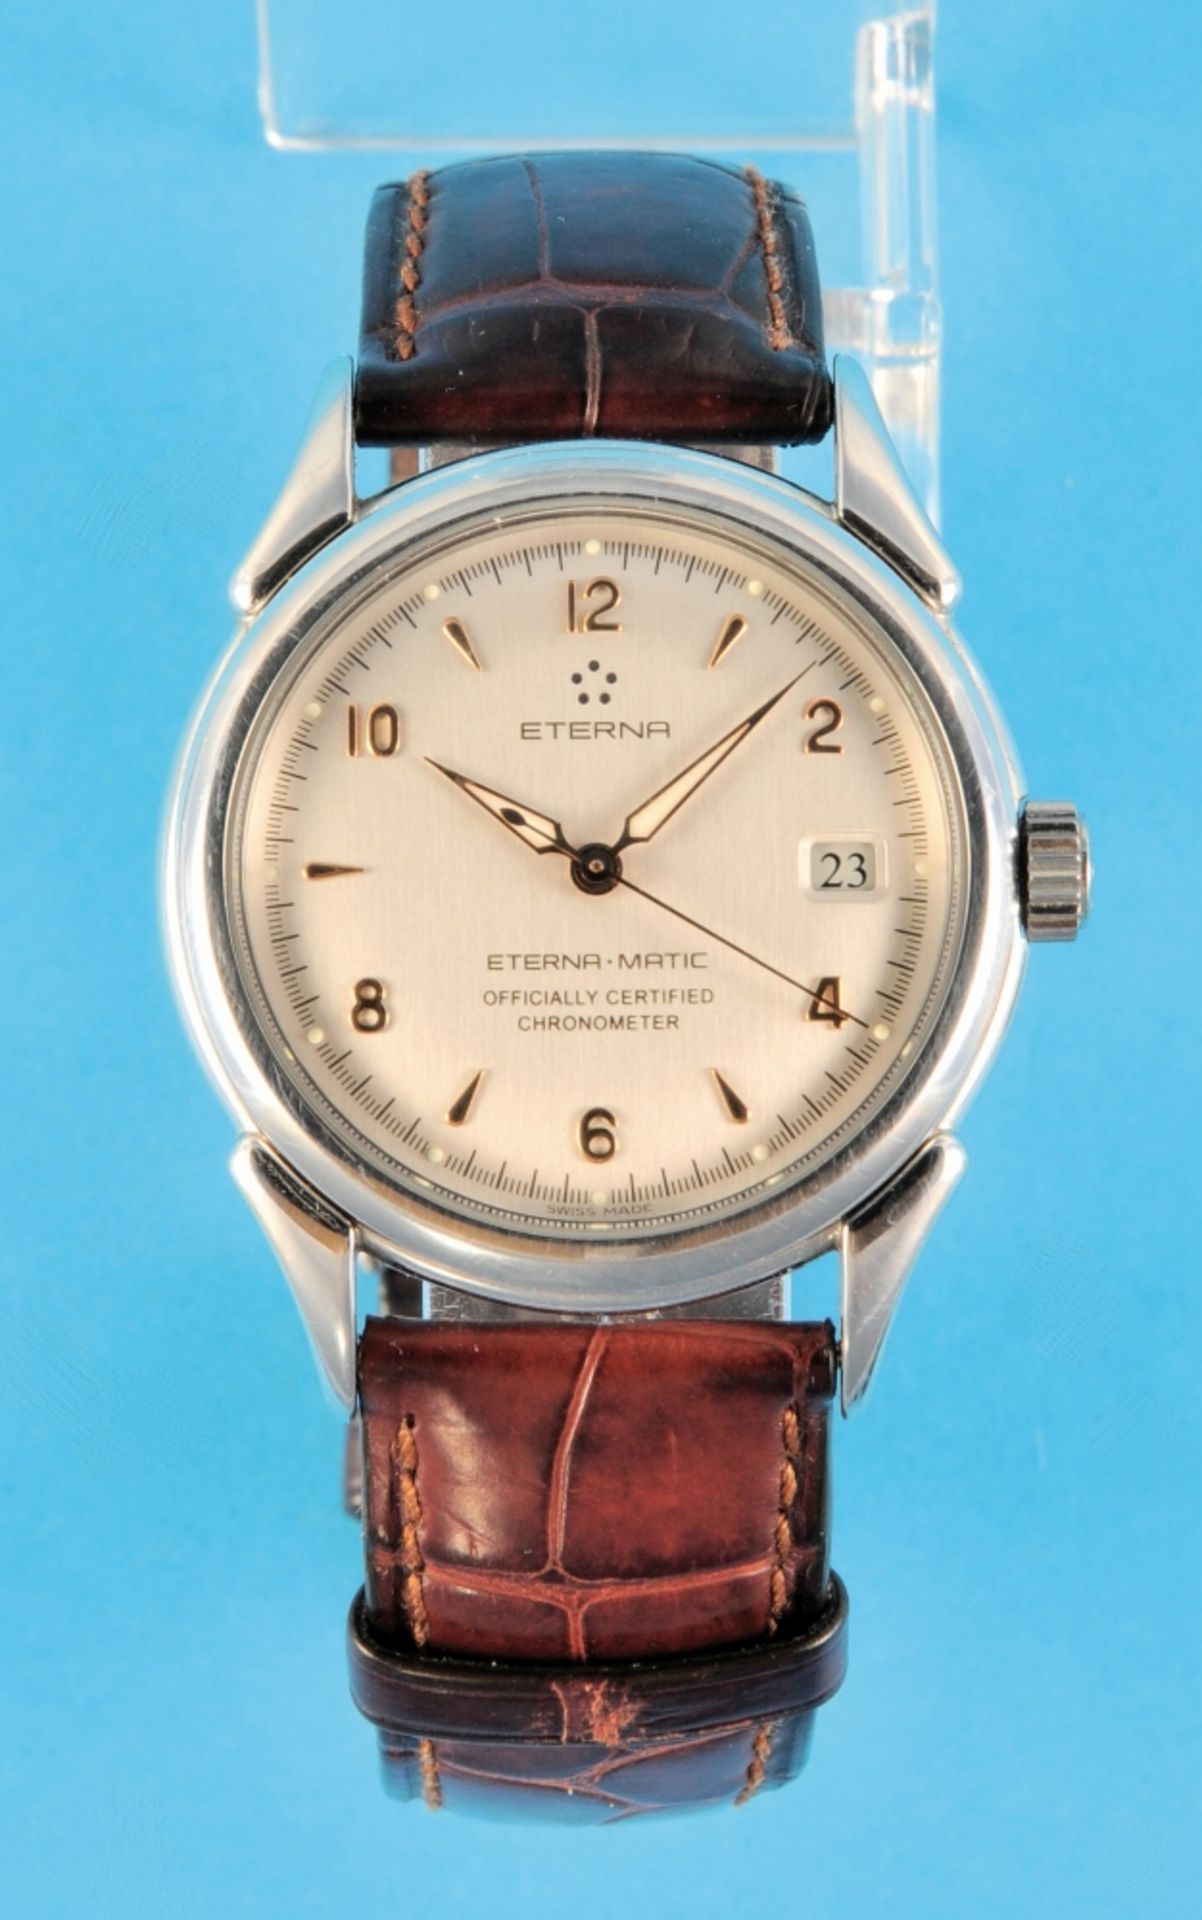 Eterna-Matic 1948 Chronometer wristwatch with wooden case, box and Eterna folding clasp, reference 8